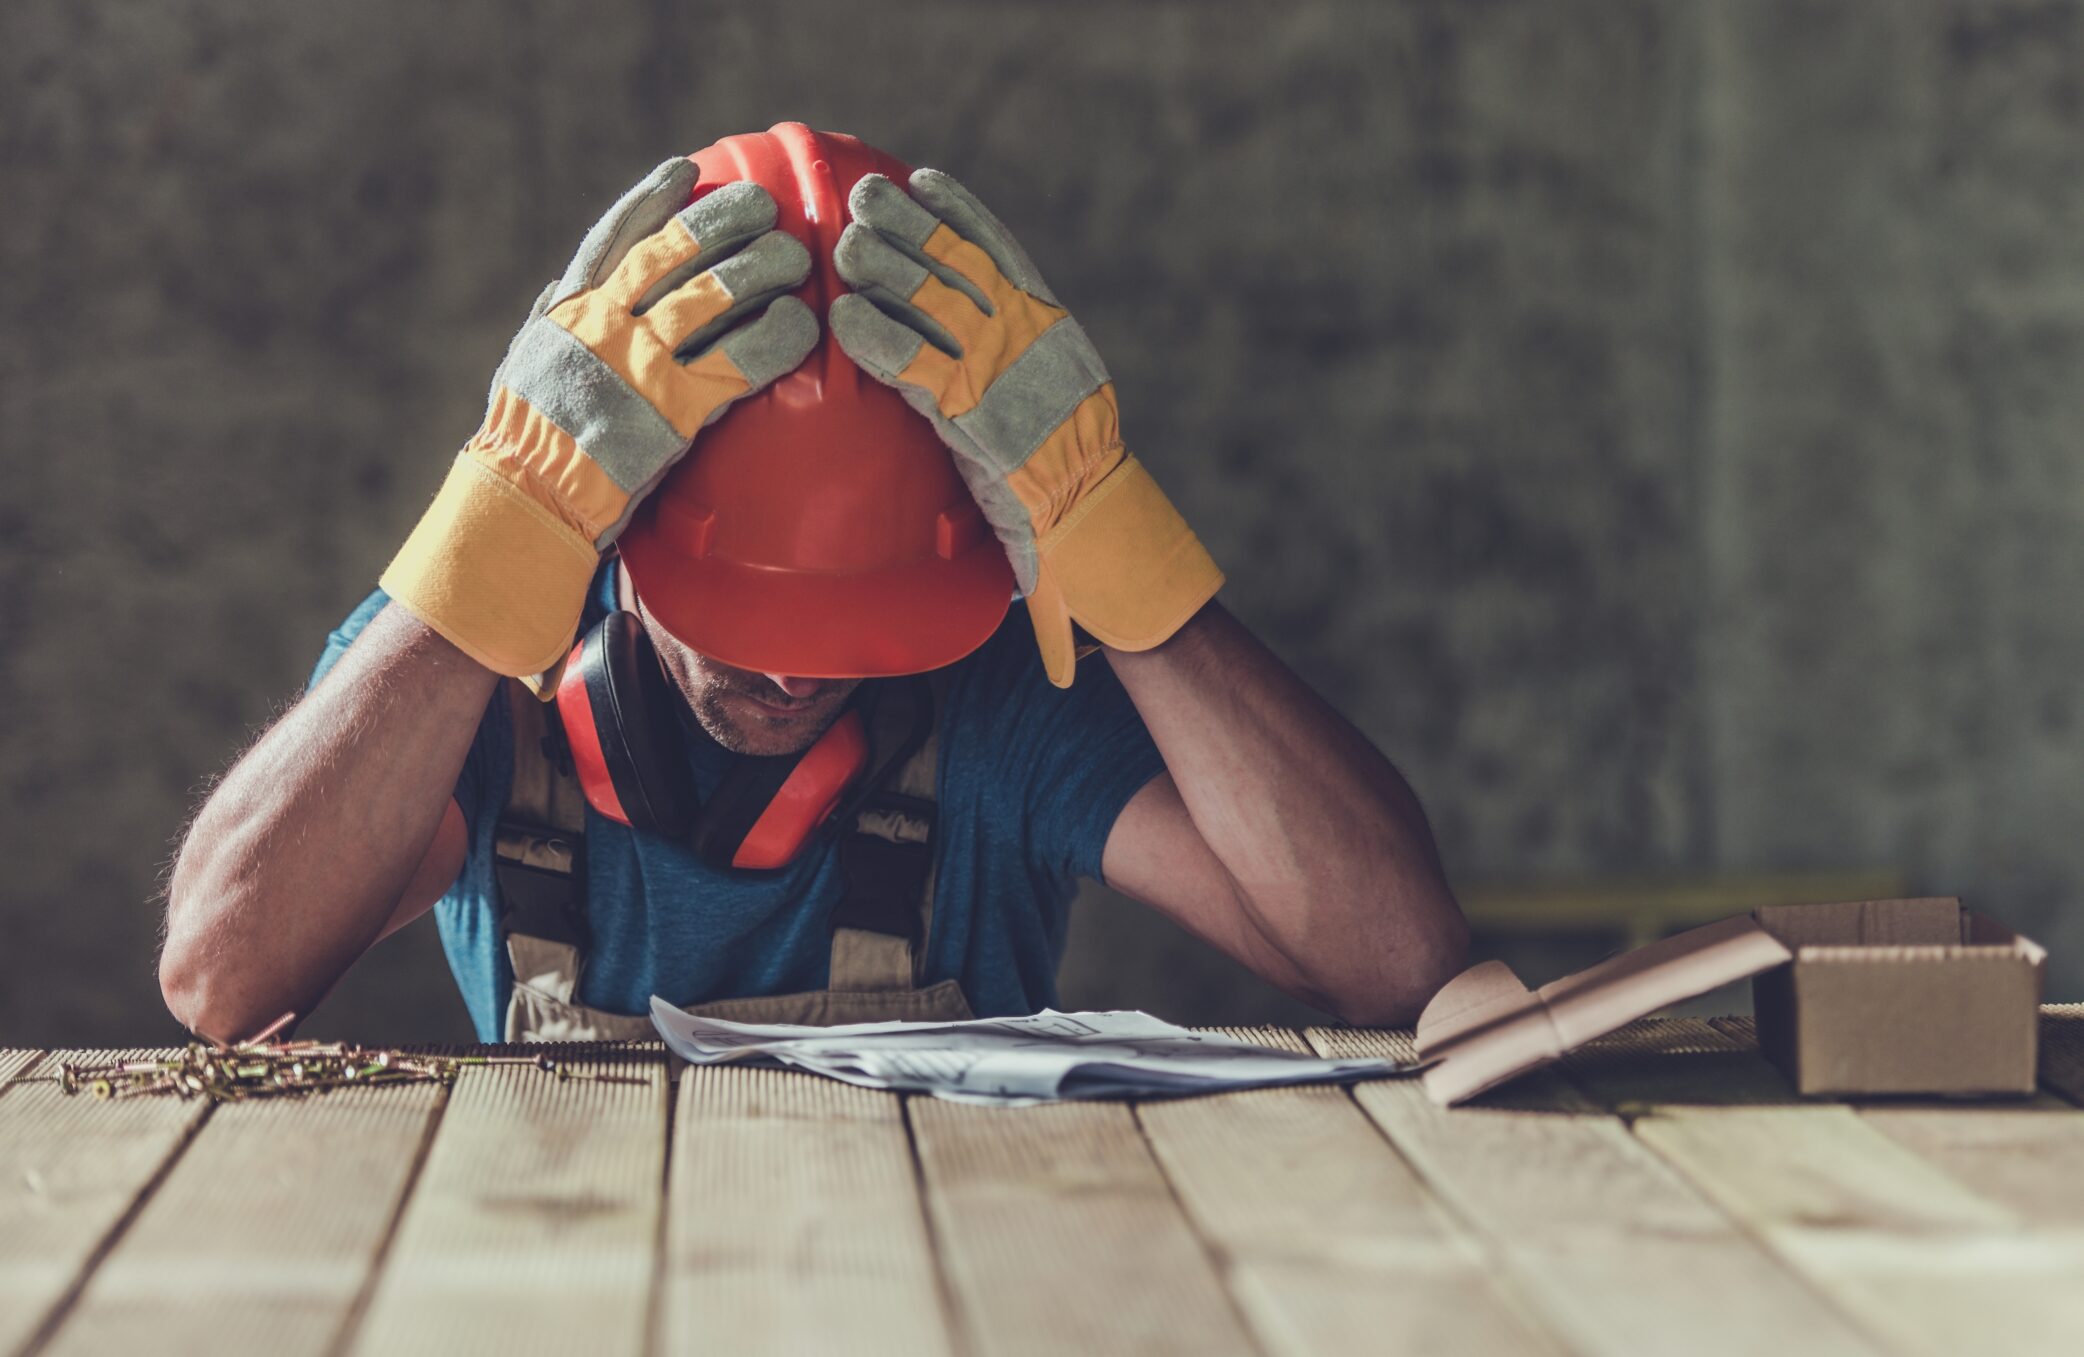 A frustrated roofer with his hands on his head